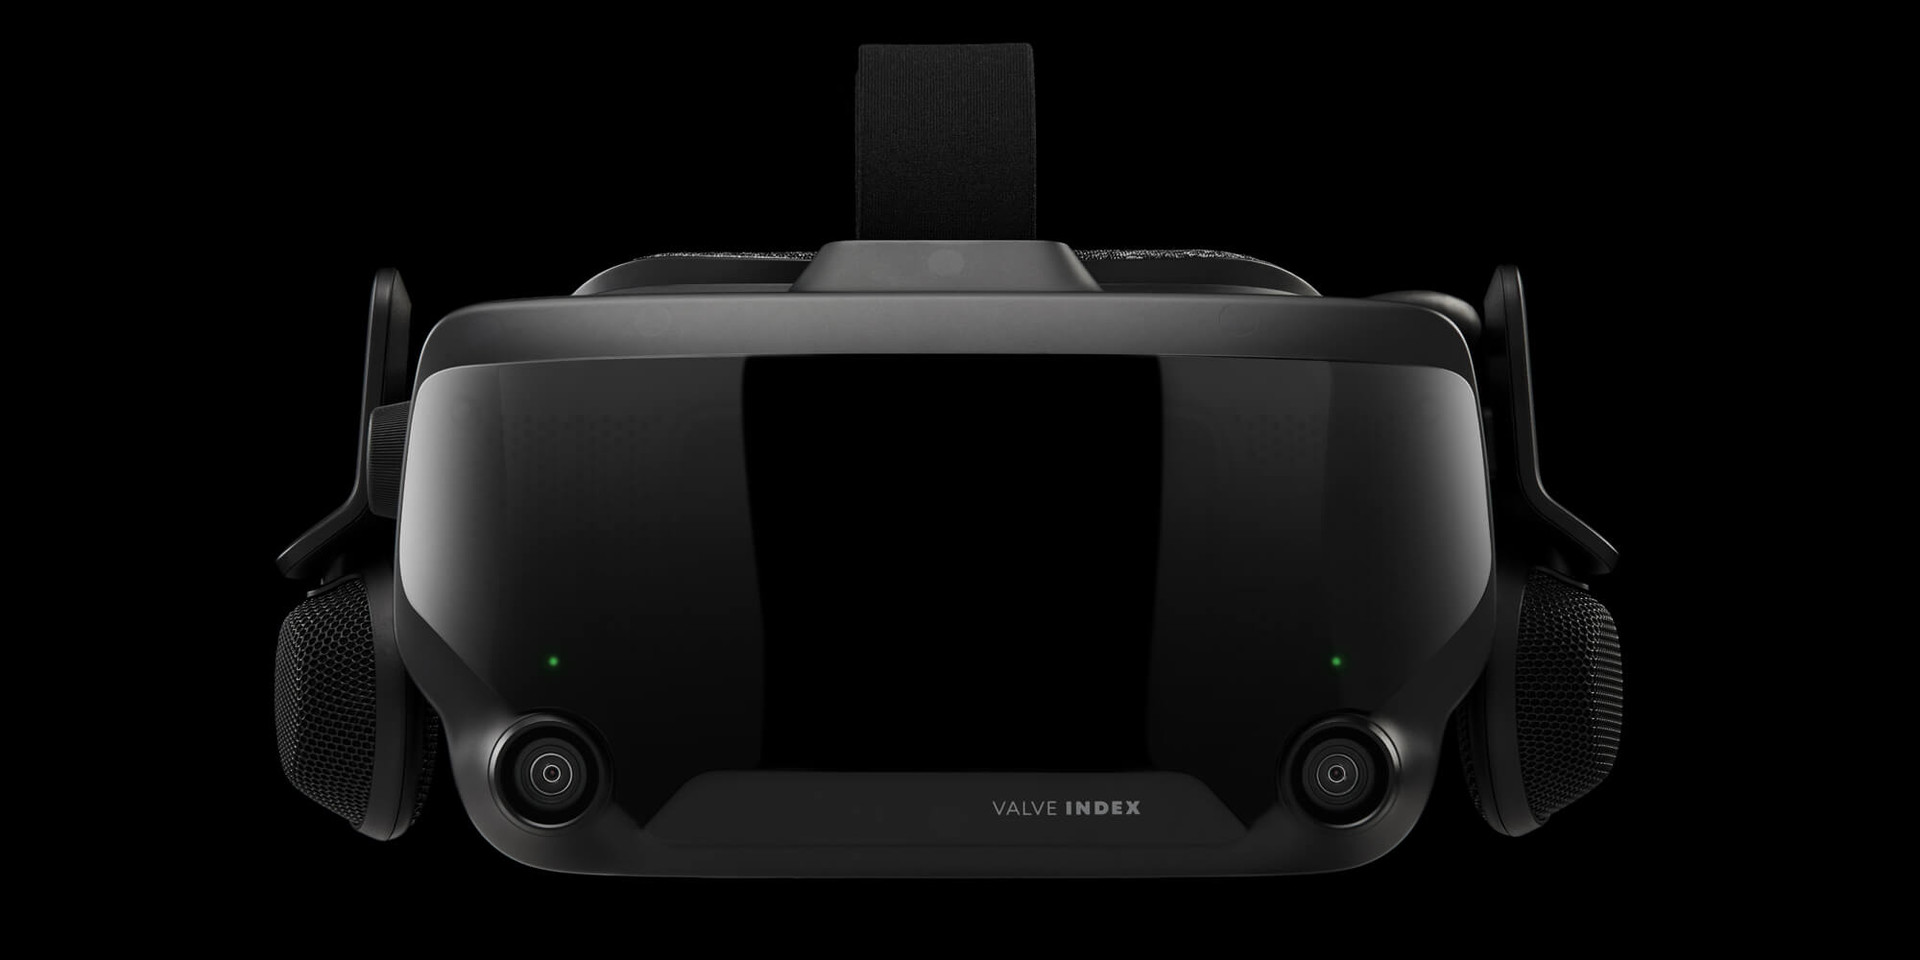 Valve Officially the Valve Index VR HMD, Full Kit Preorder $999 | TechPowerUp